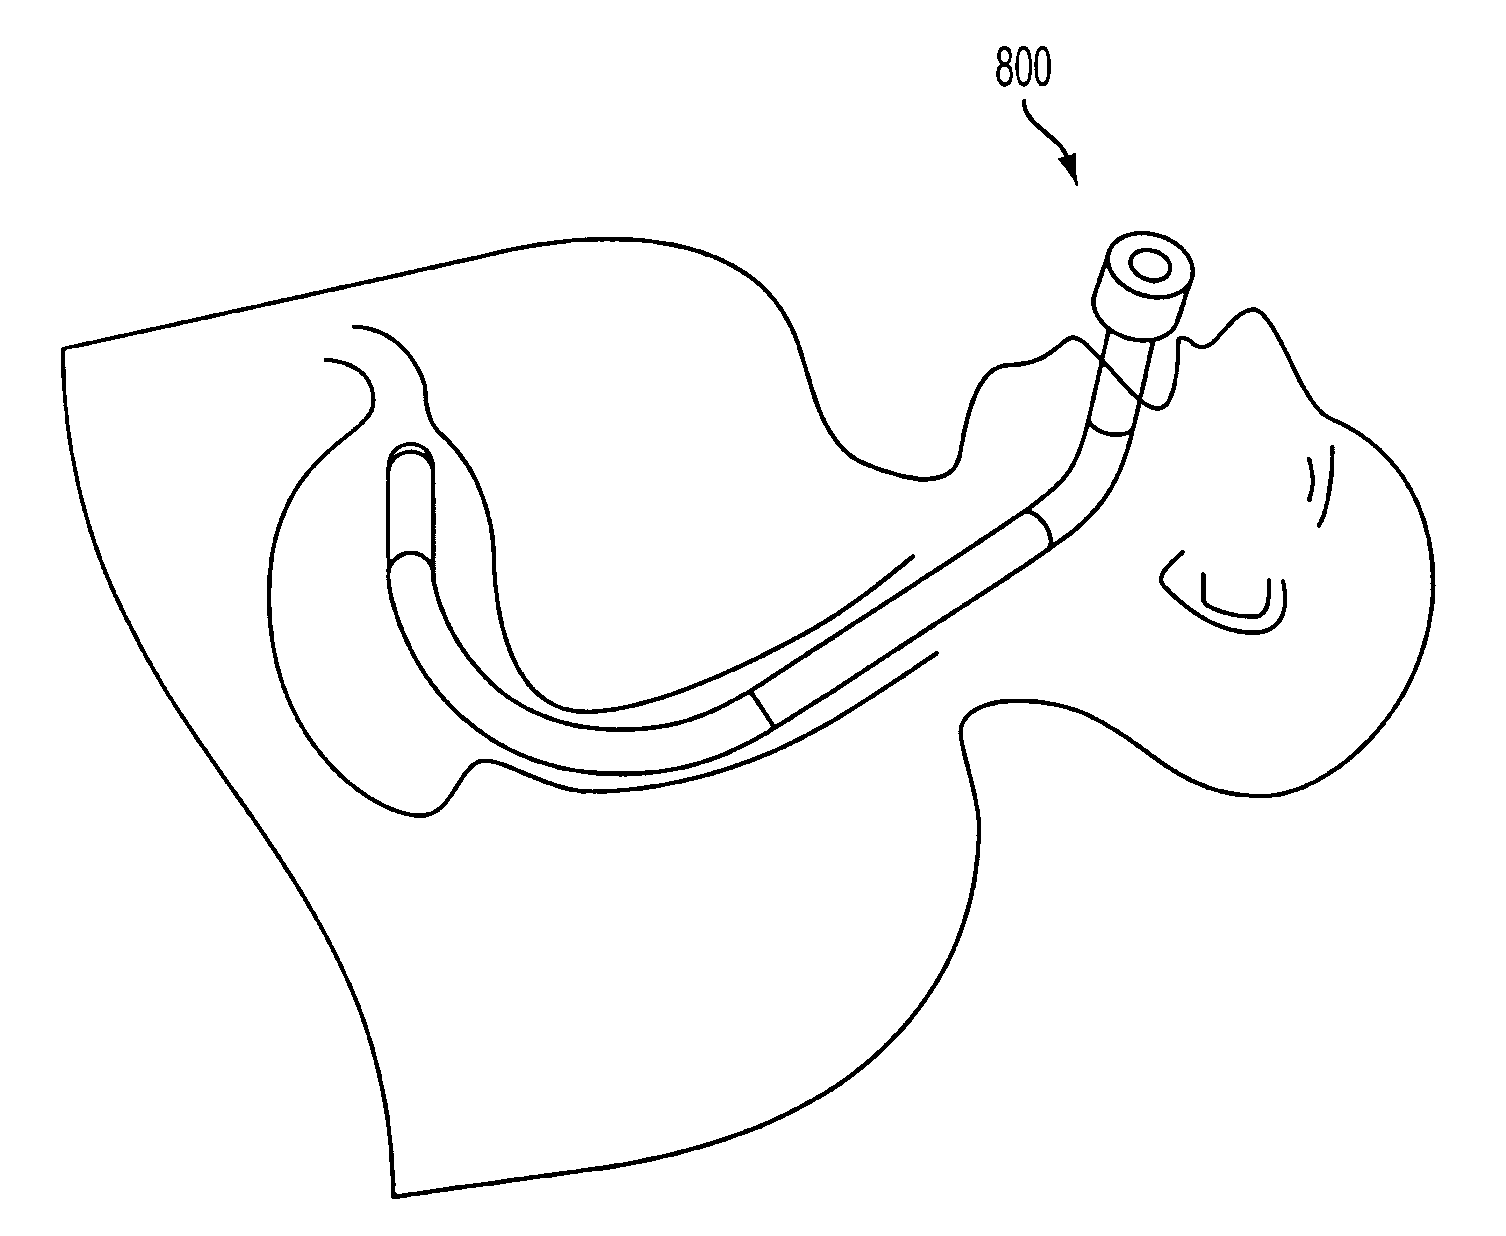 Endoluminal and transluminal surgical methods and devices